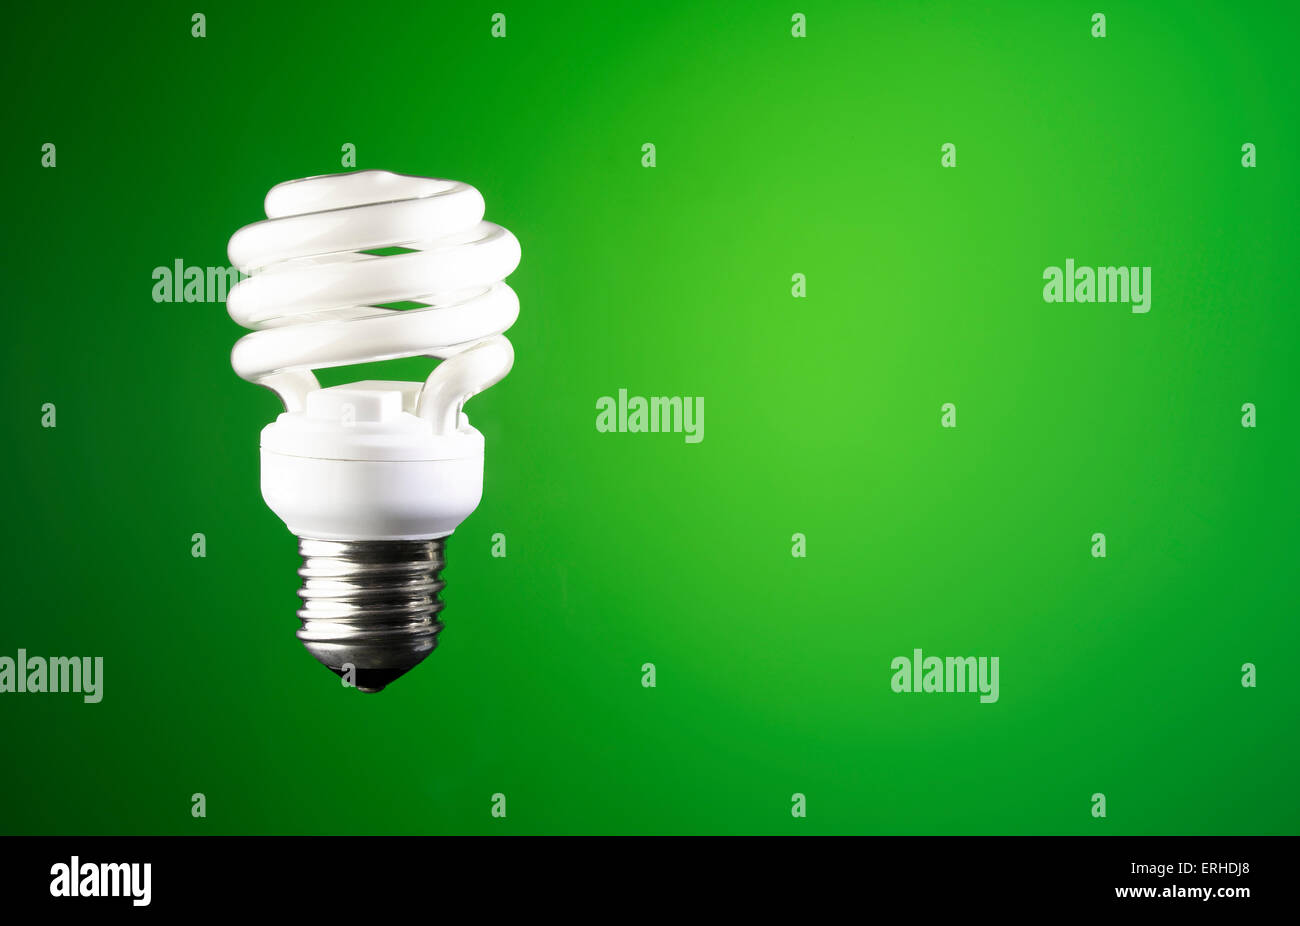 Light bulb on a green background Stock Photo